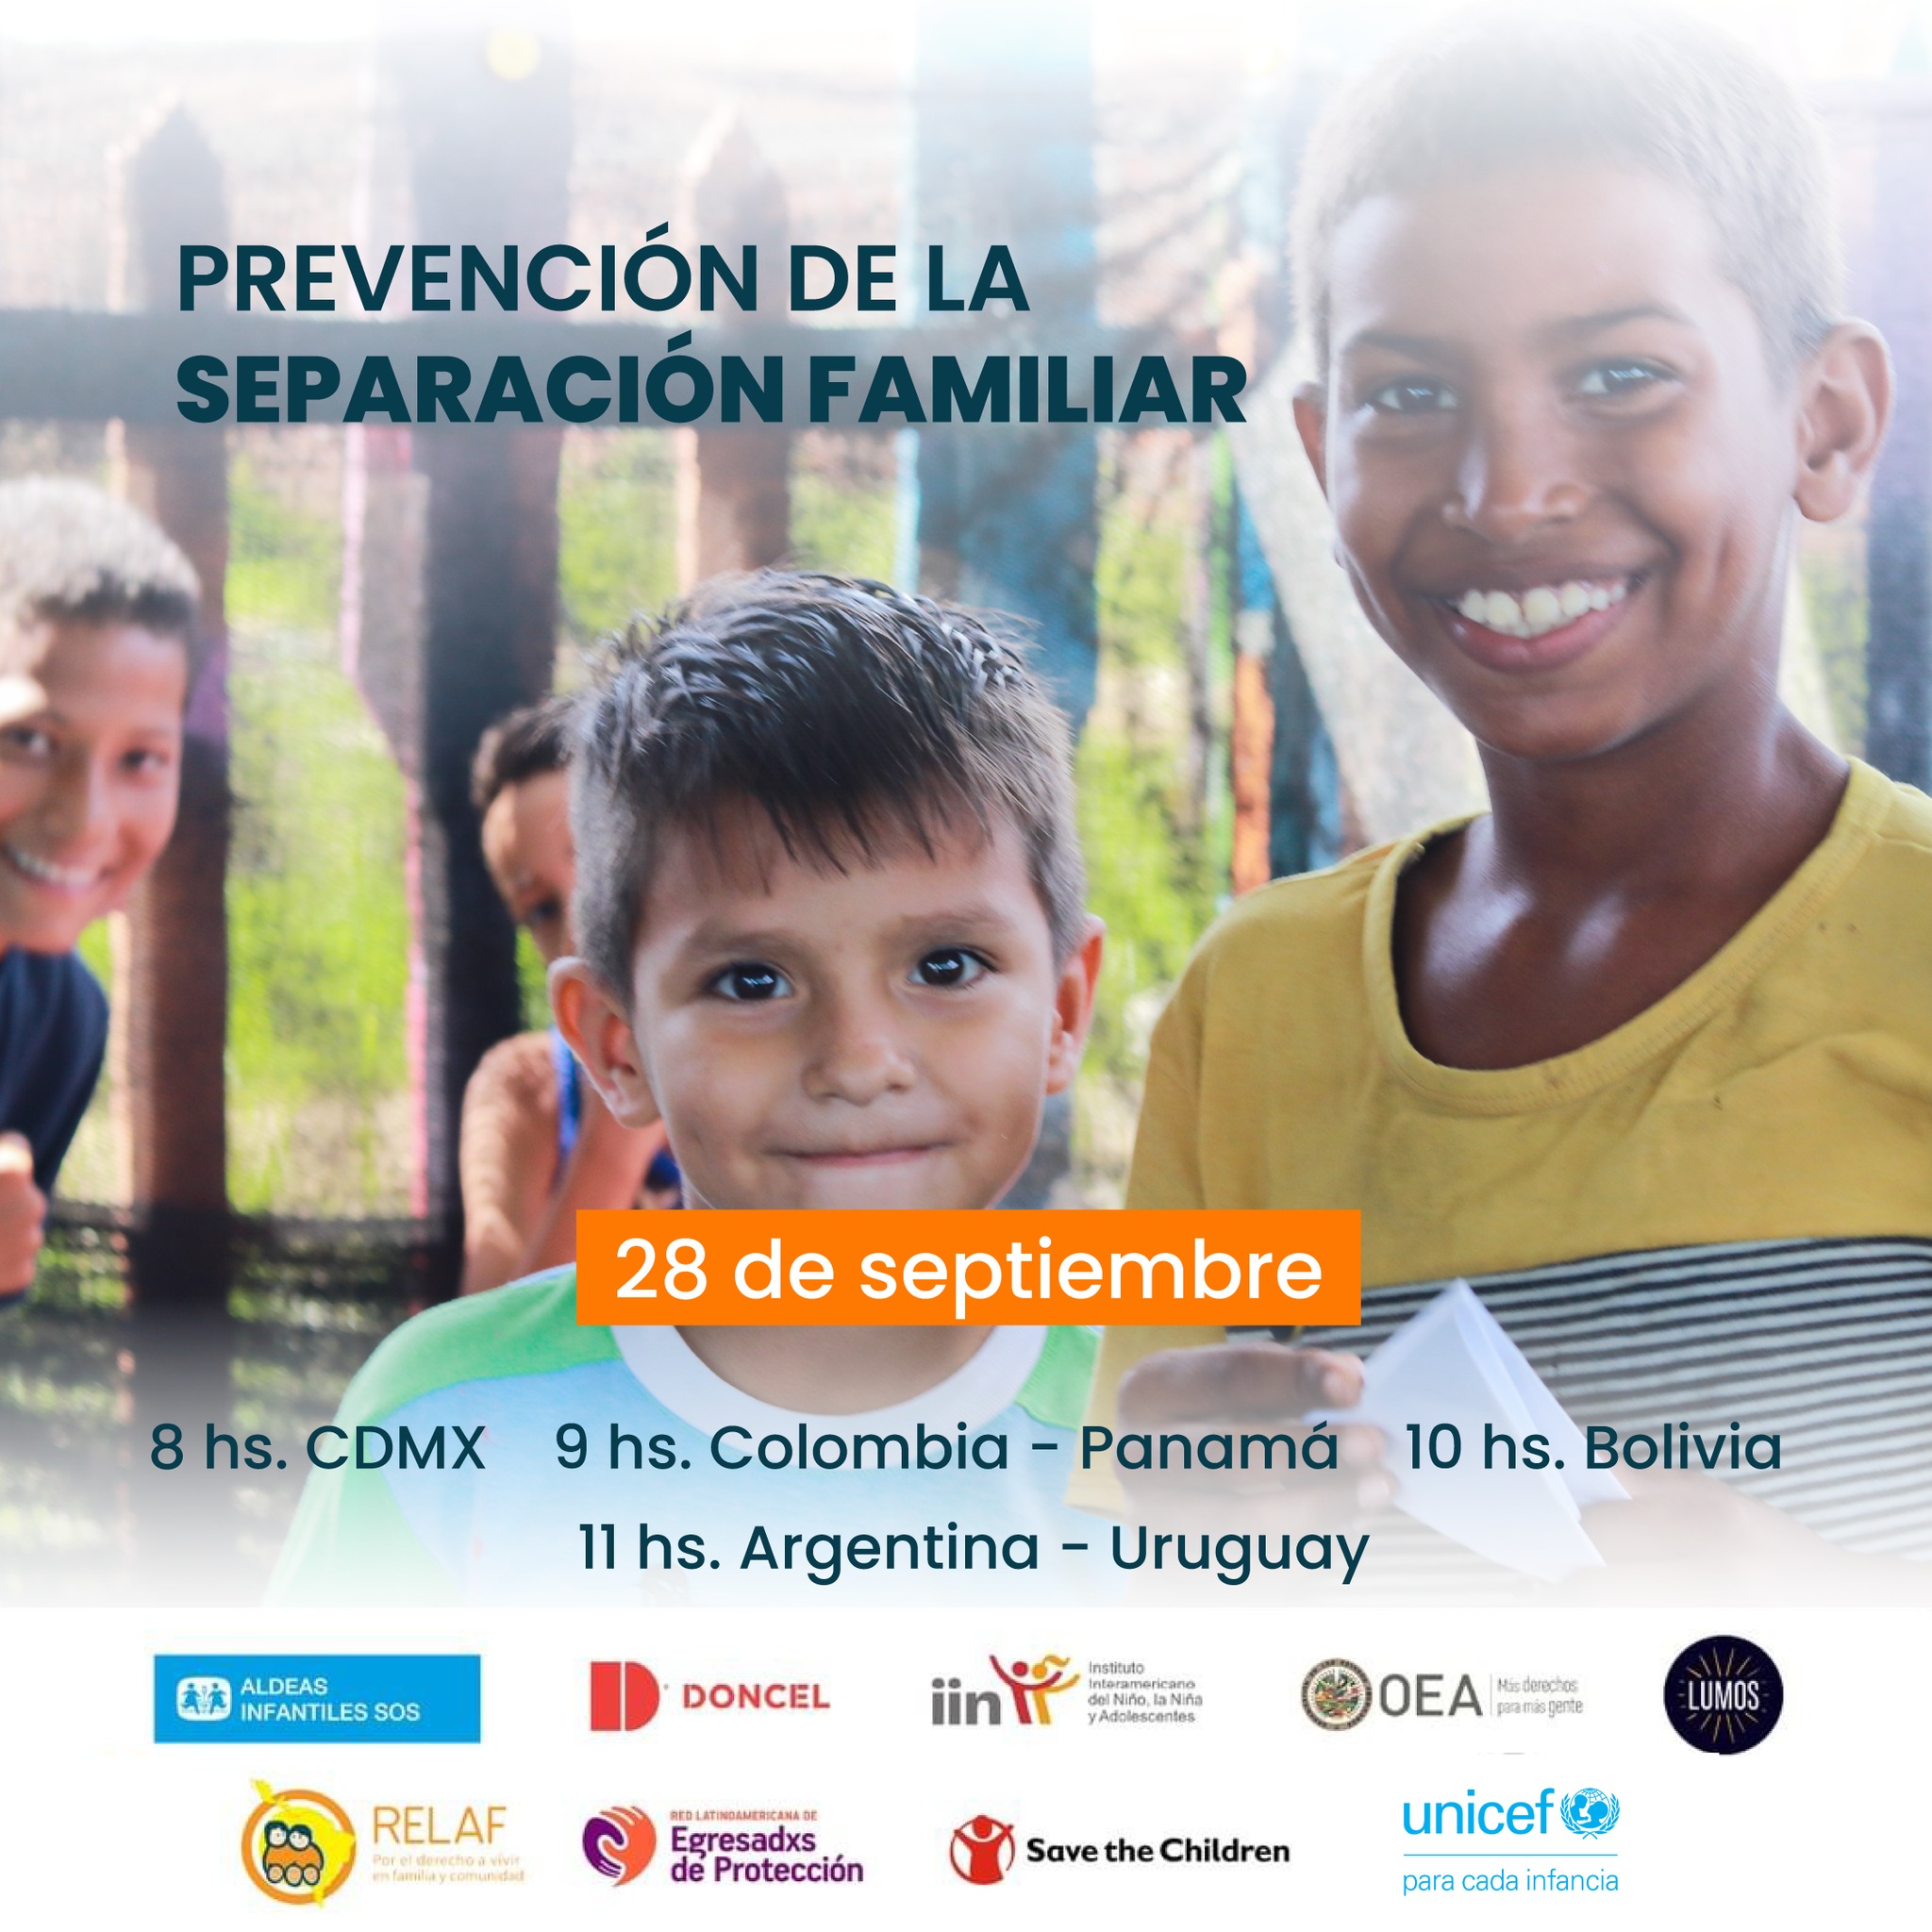 This webinar will focus on Family Separation Prevention. Three experiences from countries in the region will be presented, where public authorities and their teams will share their advances and pending challenges in policies and family support programs.